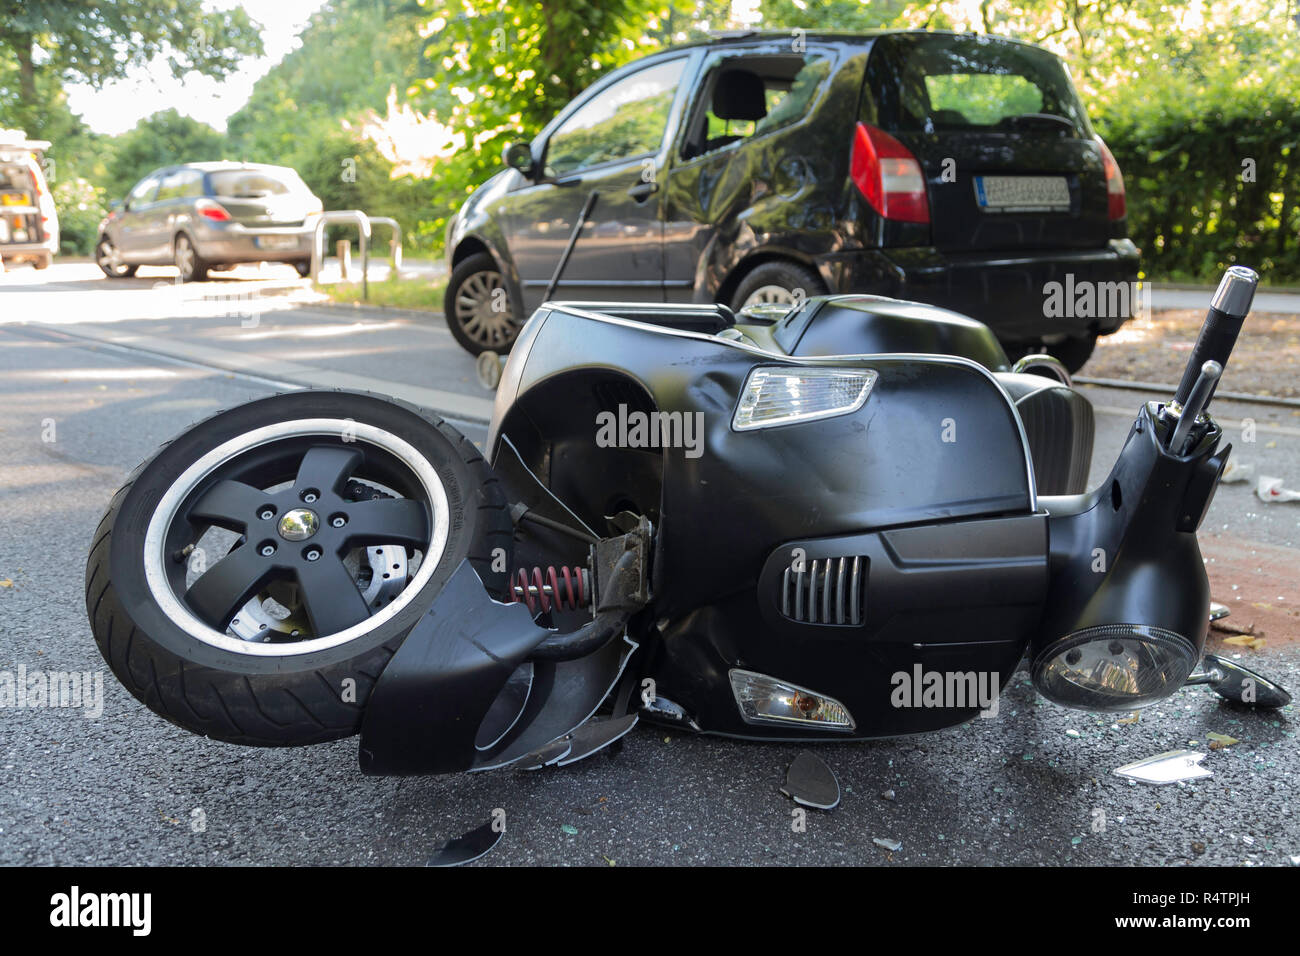 black scooter after crash Stock Photo